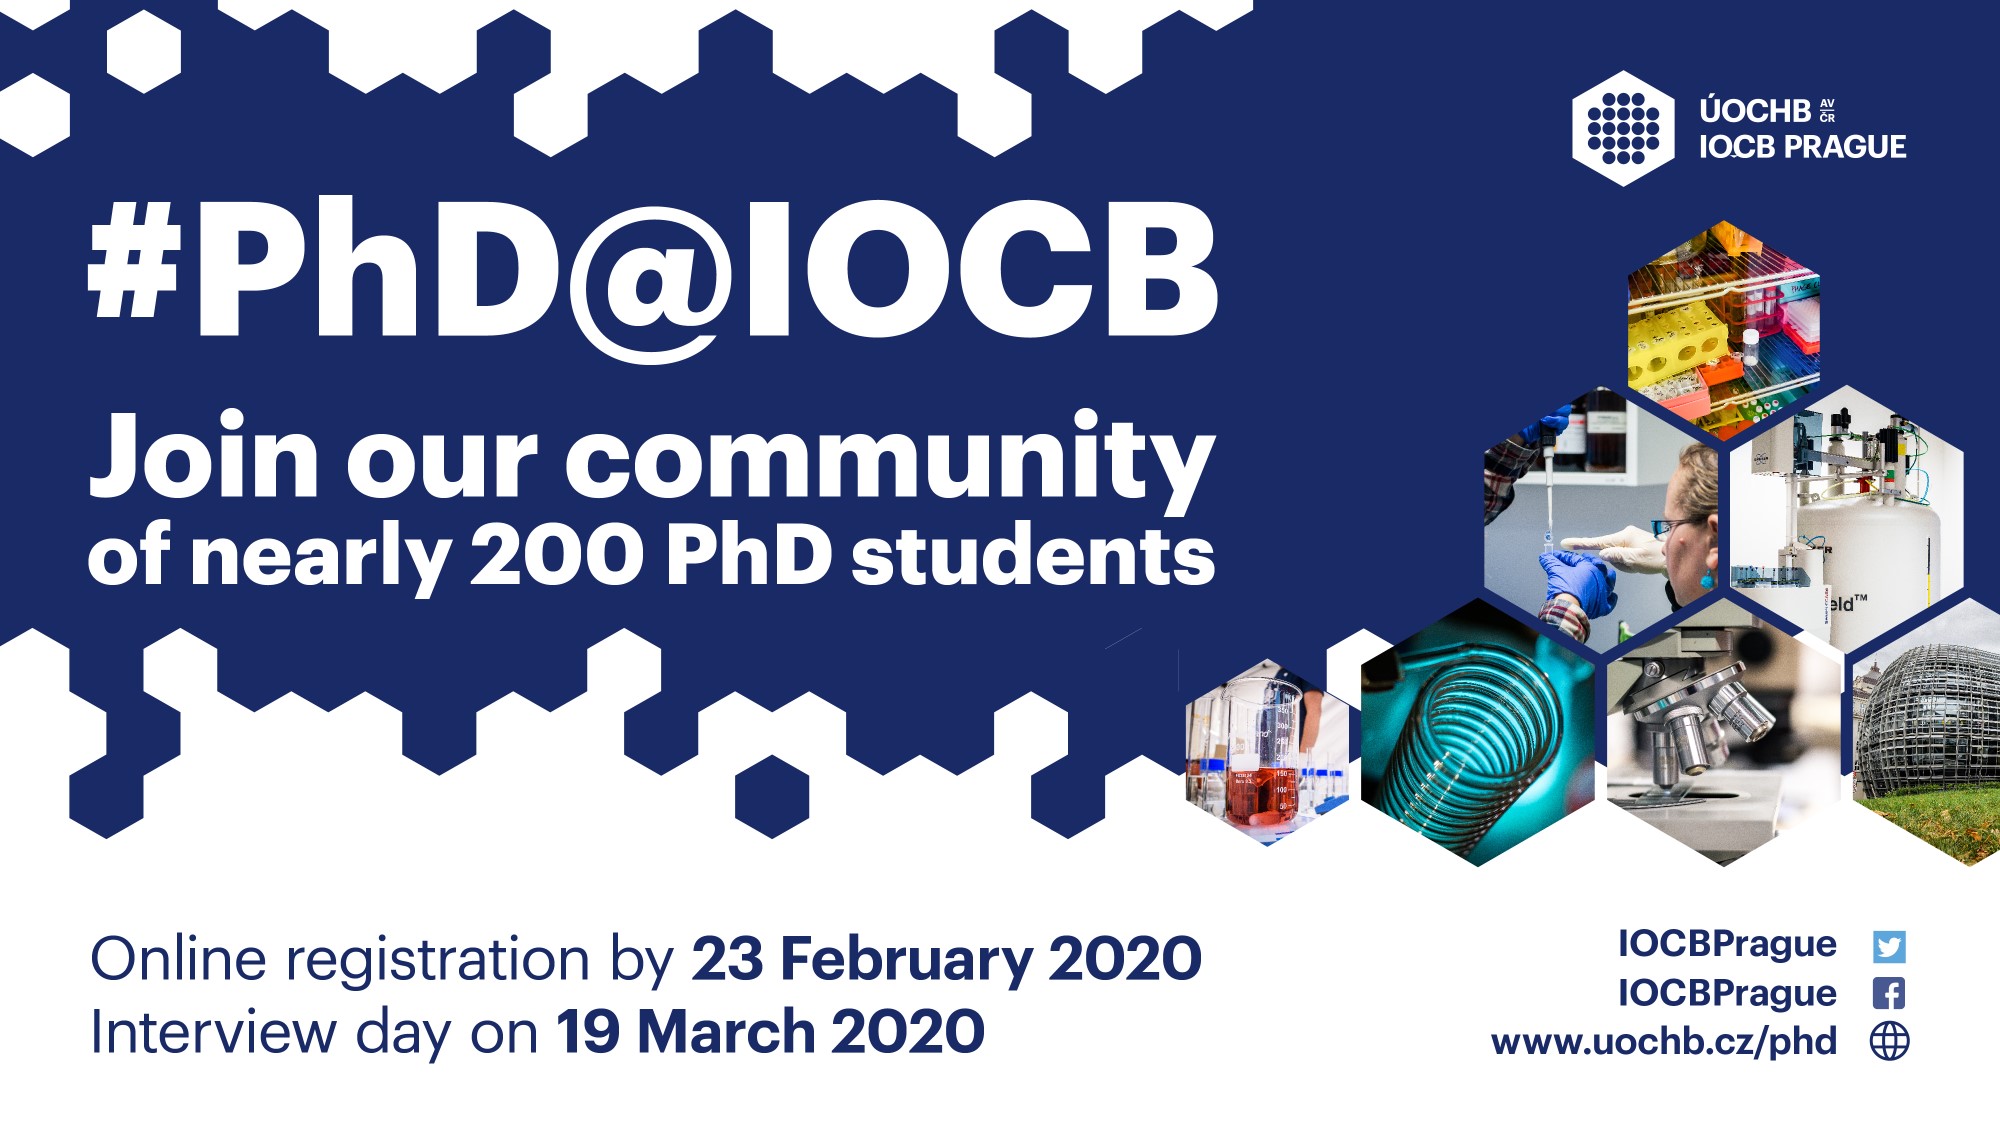 PhD projects at IOCB Prague – Call for Applications 2020